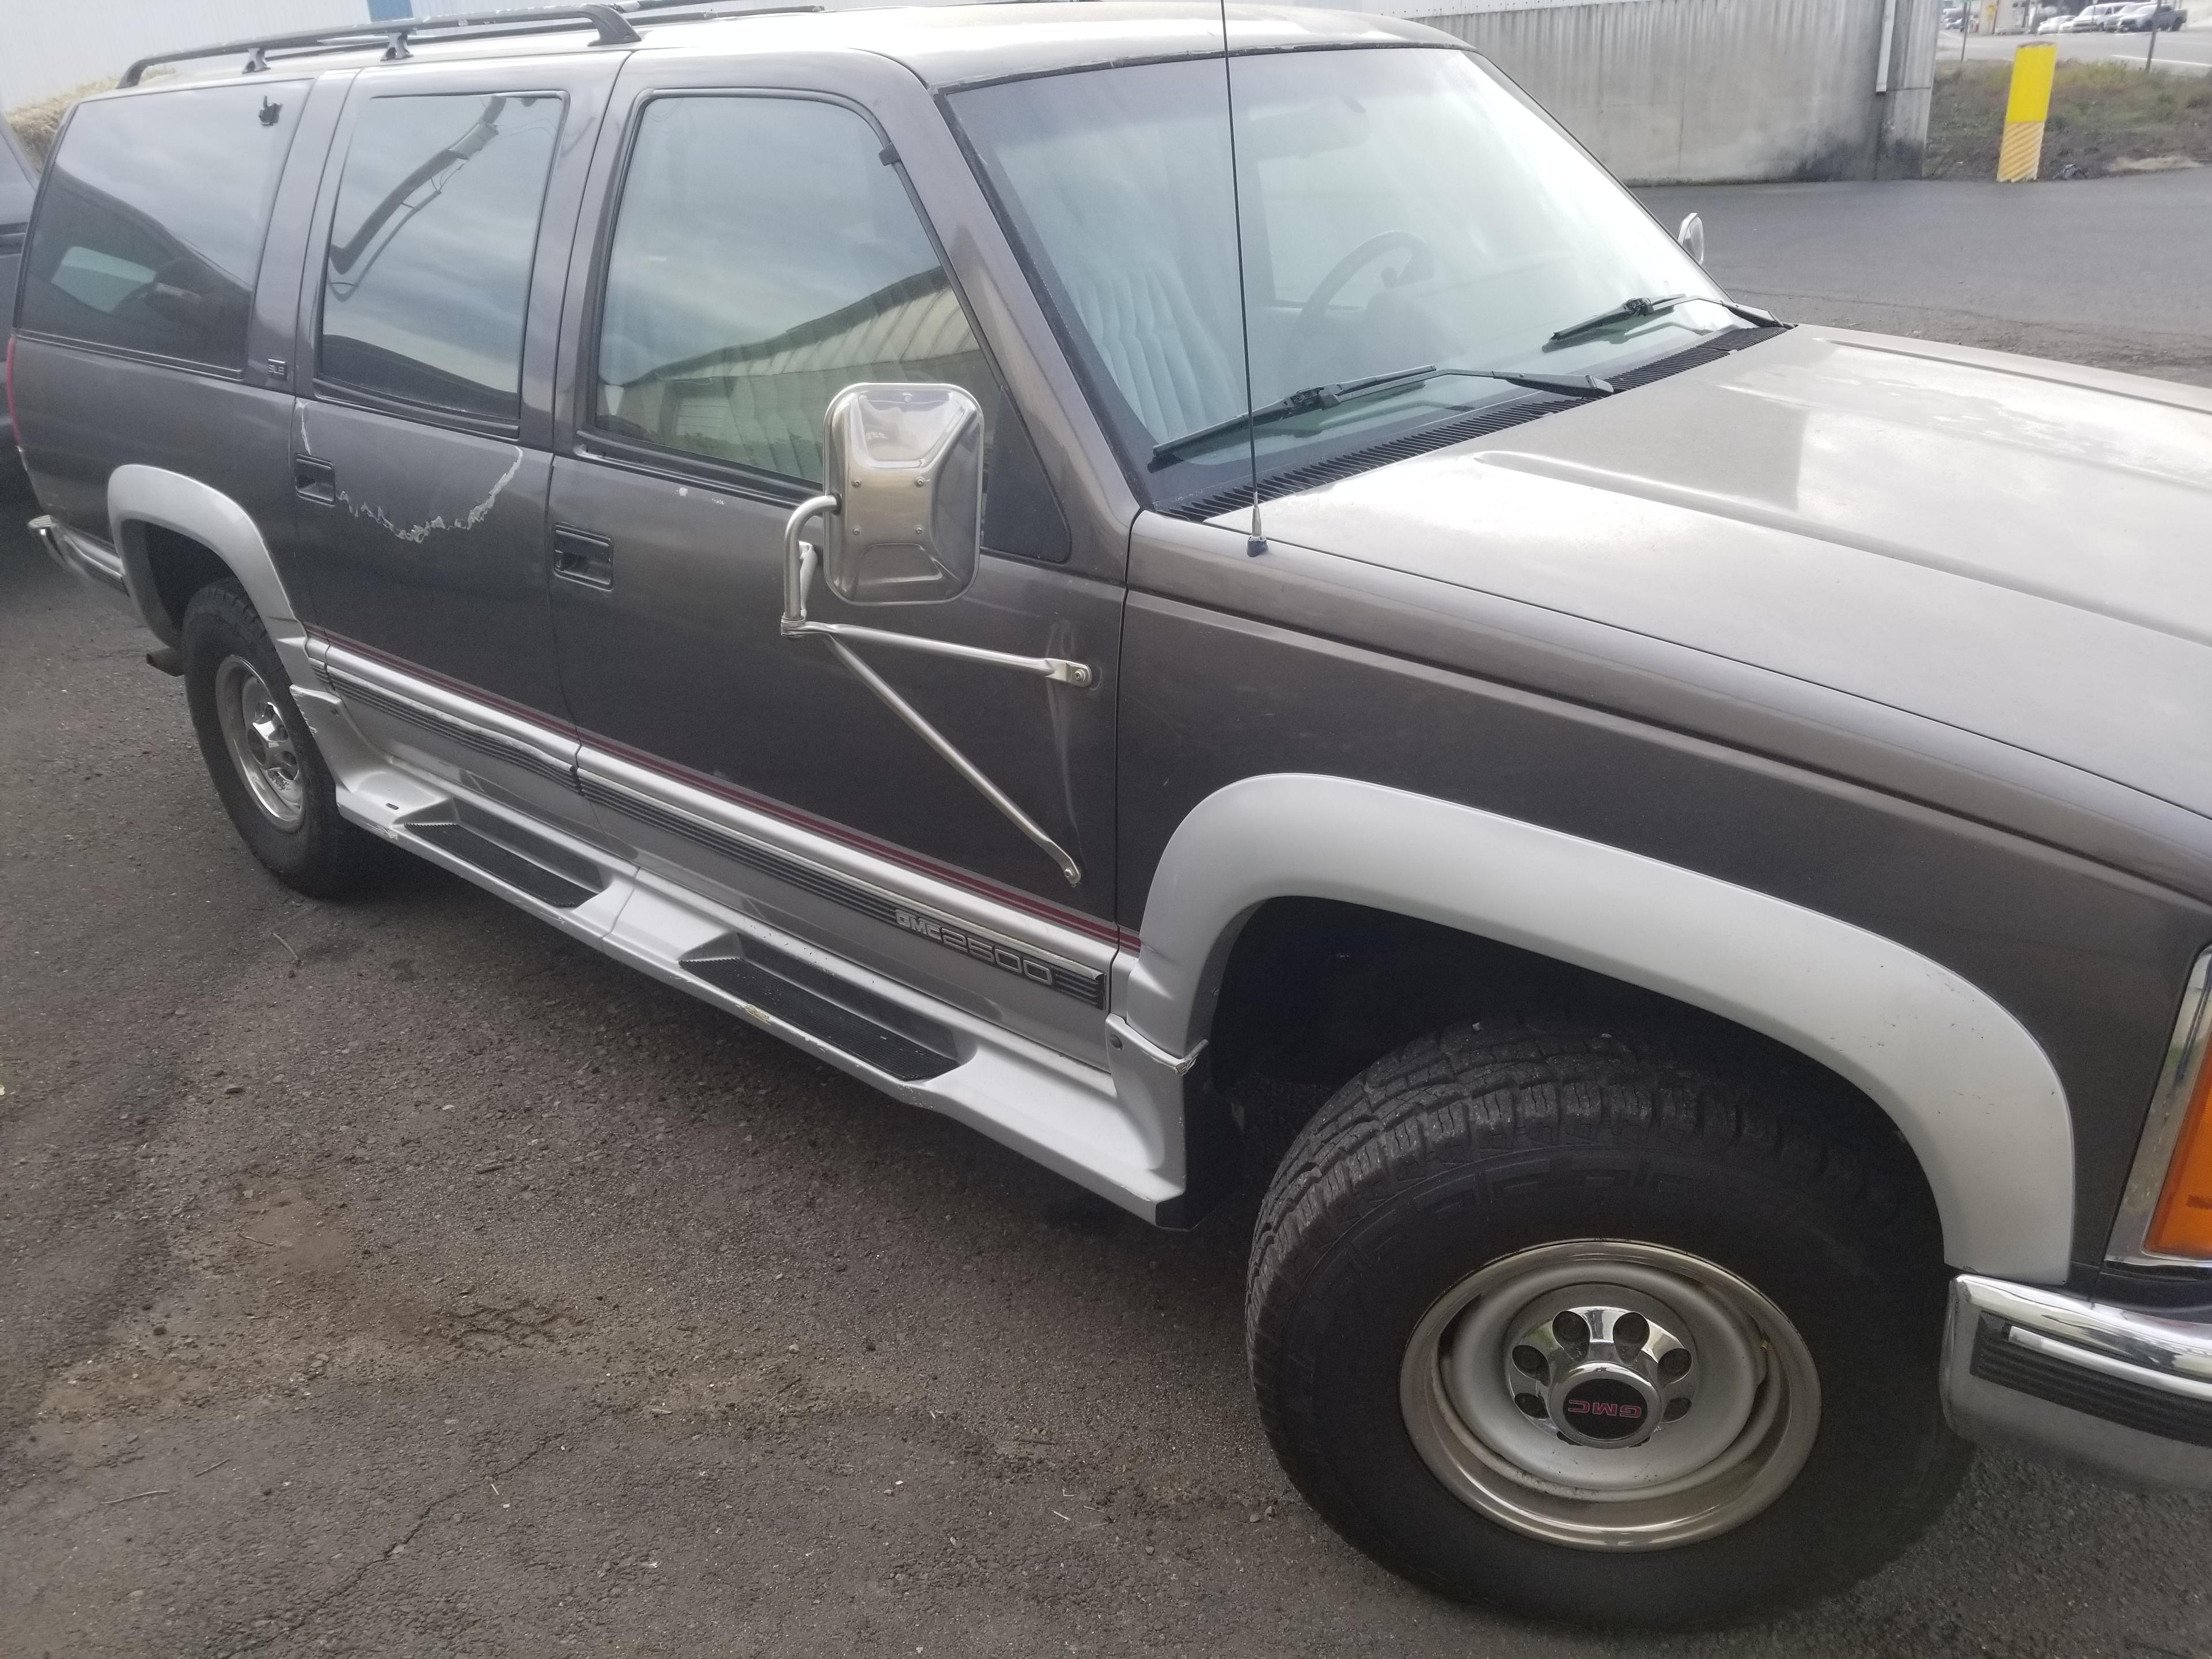 1993 Suburban 454 NO REVERSE SOLD AS IS